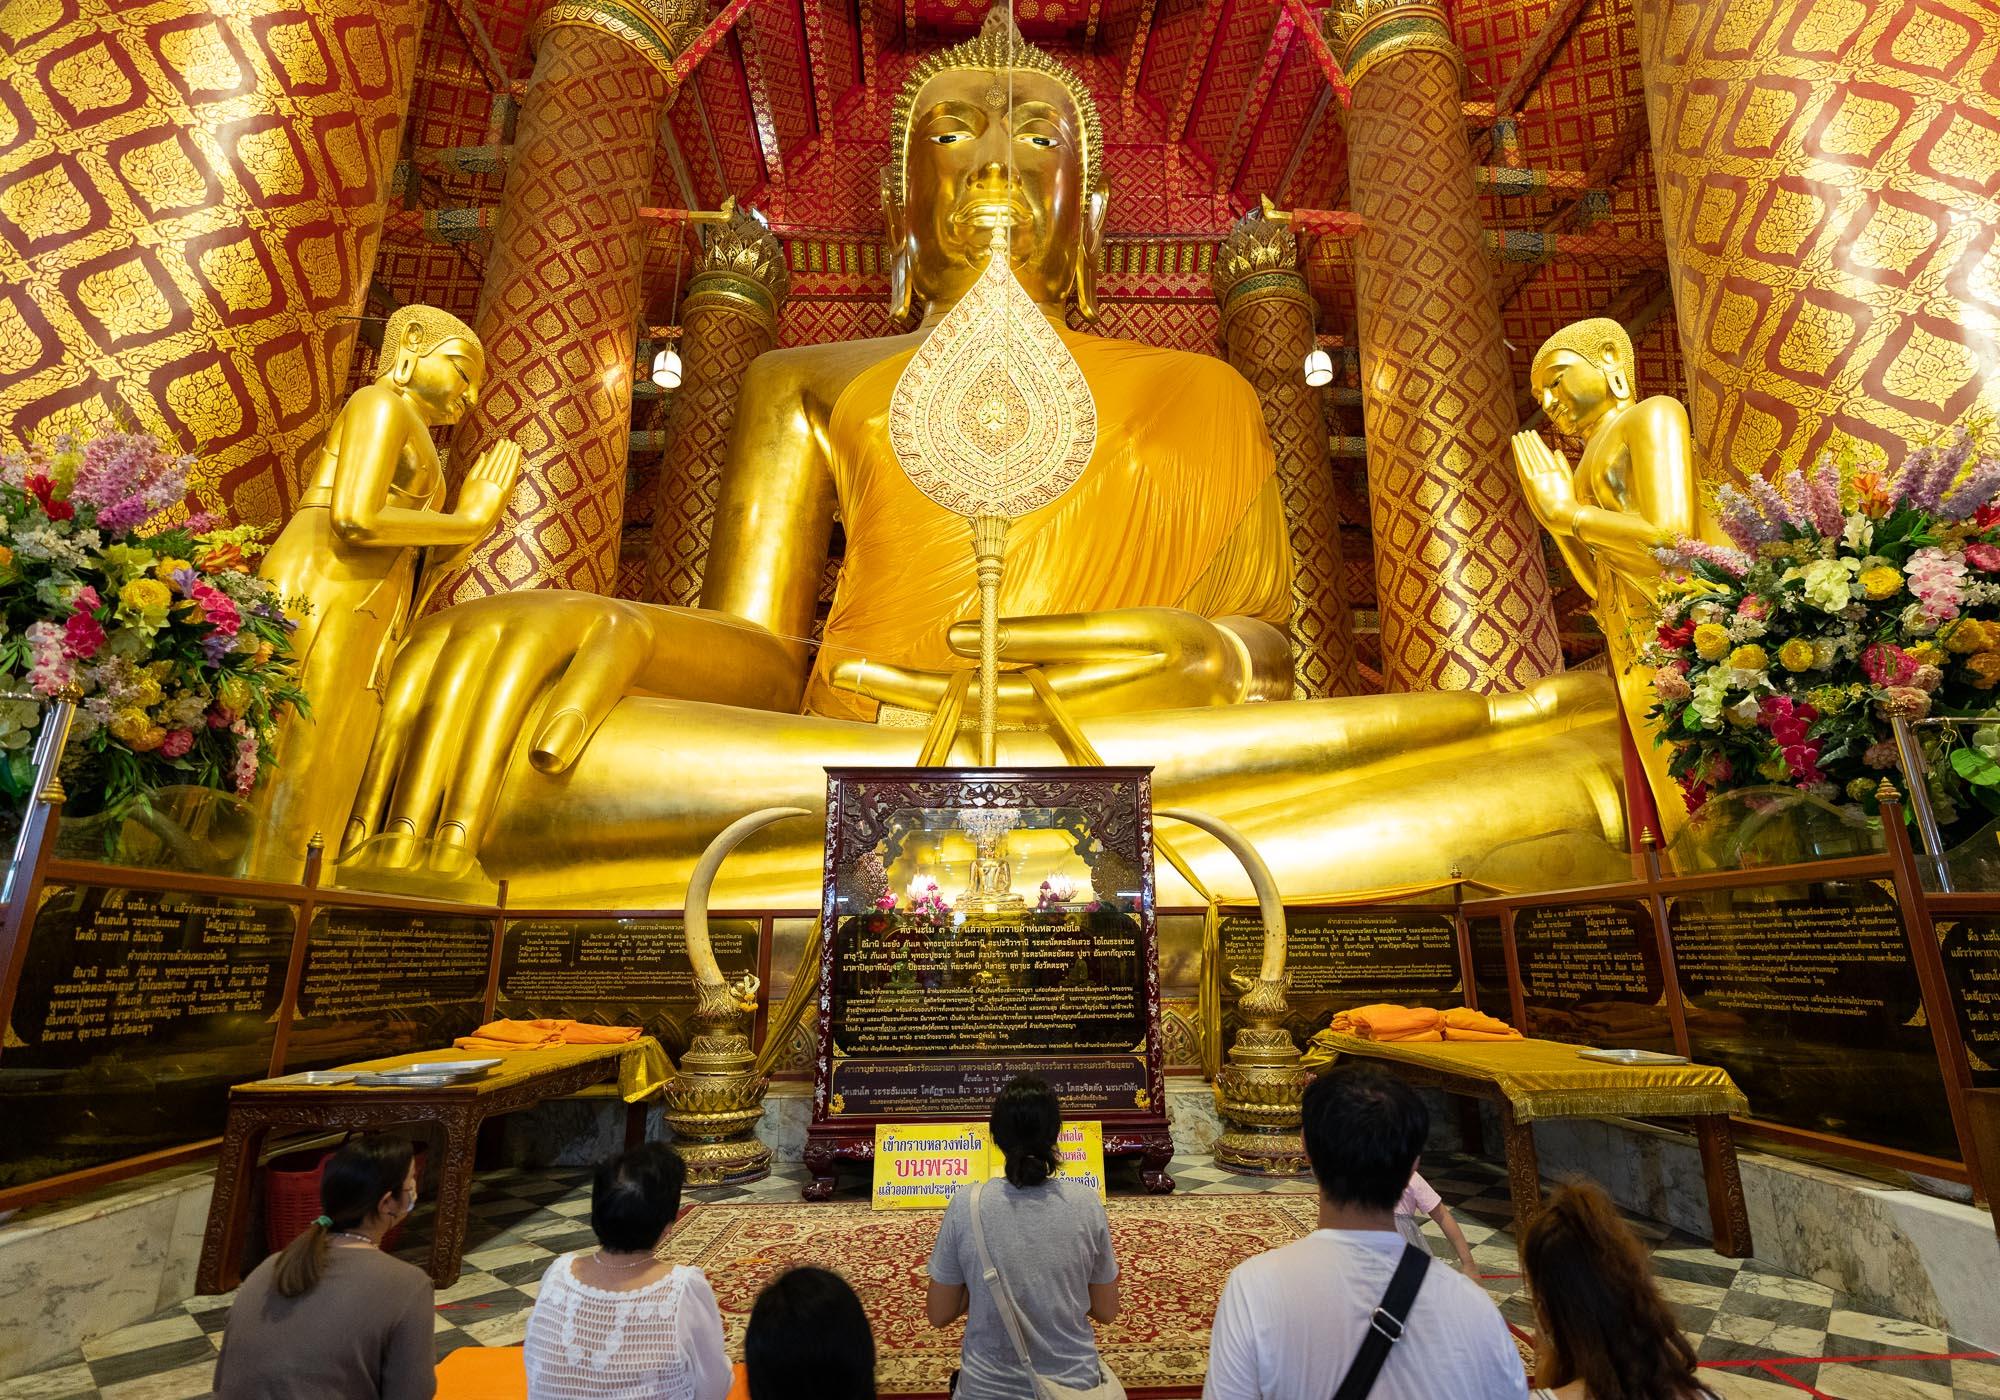 Wat Phanan Choeng is one of the most visited temples by locals, with the 19-metre-high golden Buddha one of the highlights. – © Michael Turtle